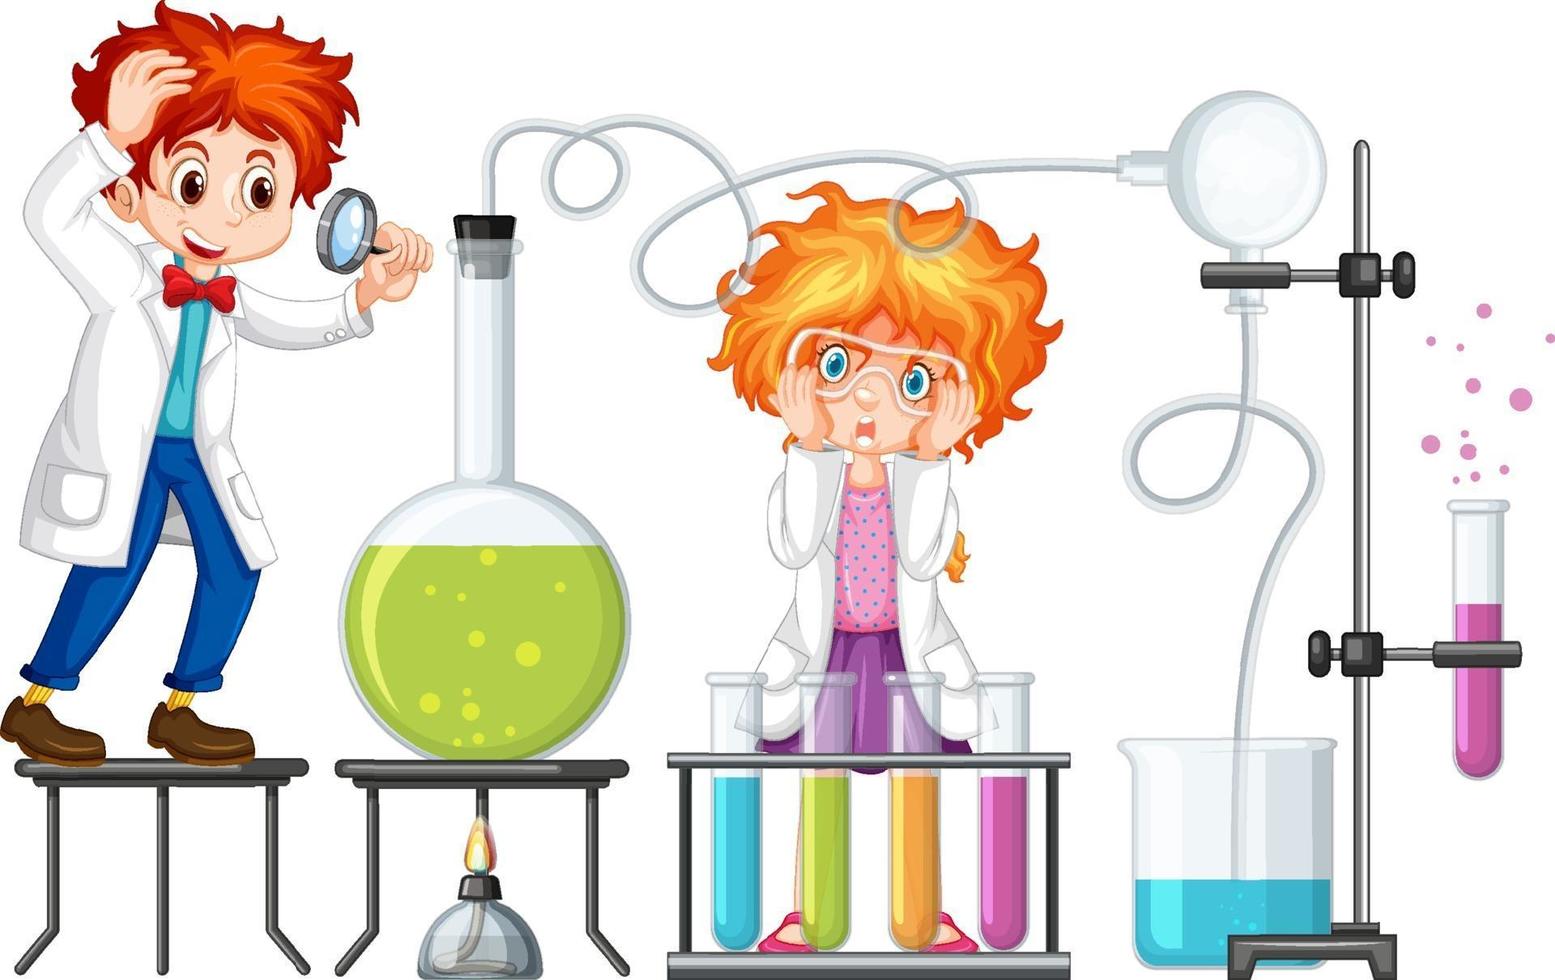 Student with experiment chemistry items vector